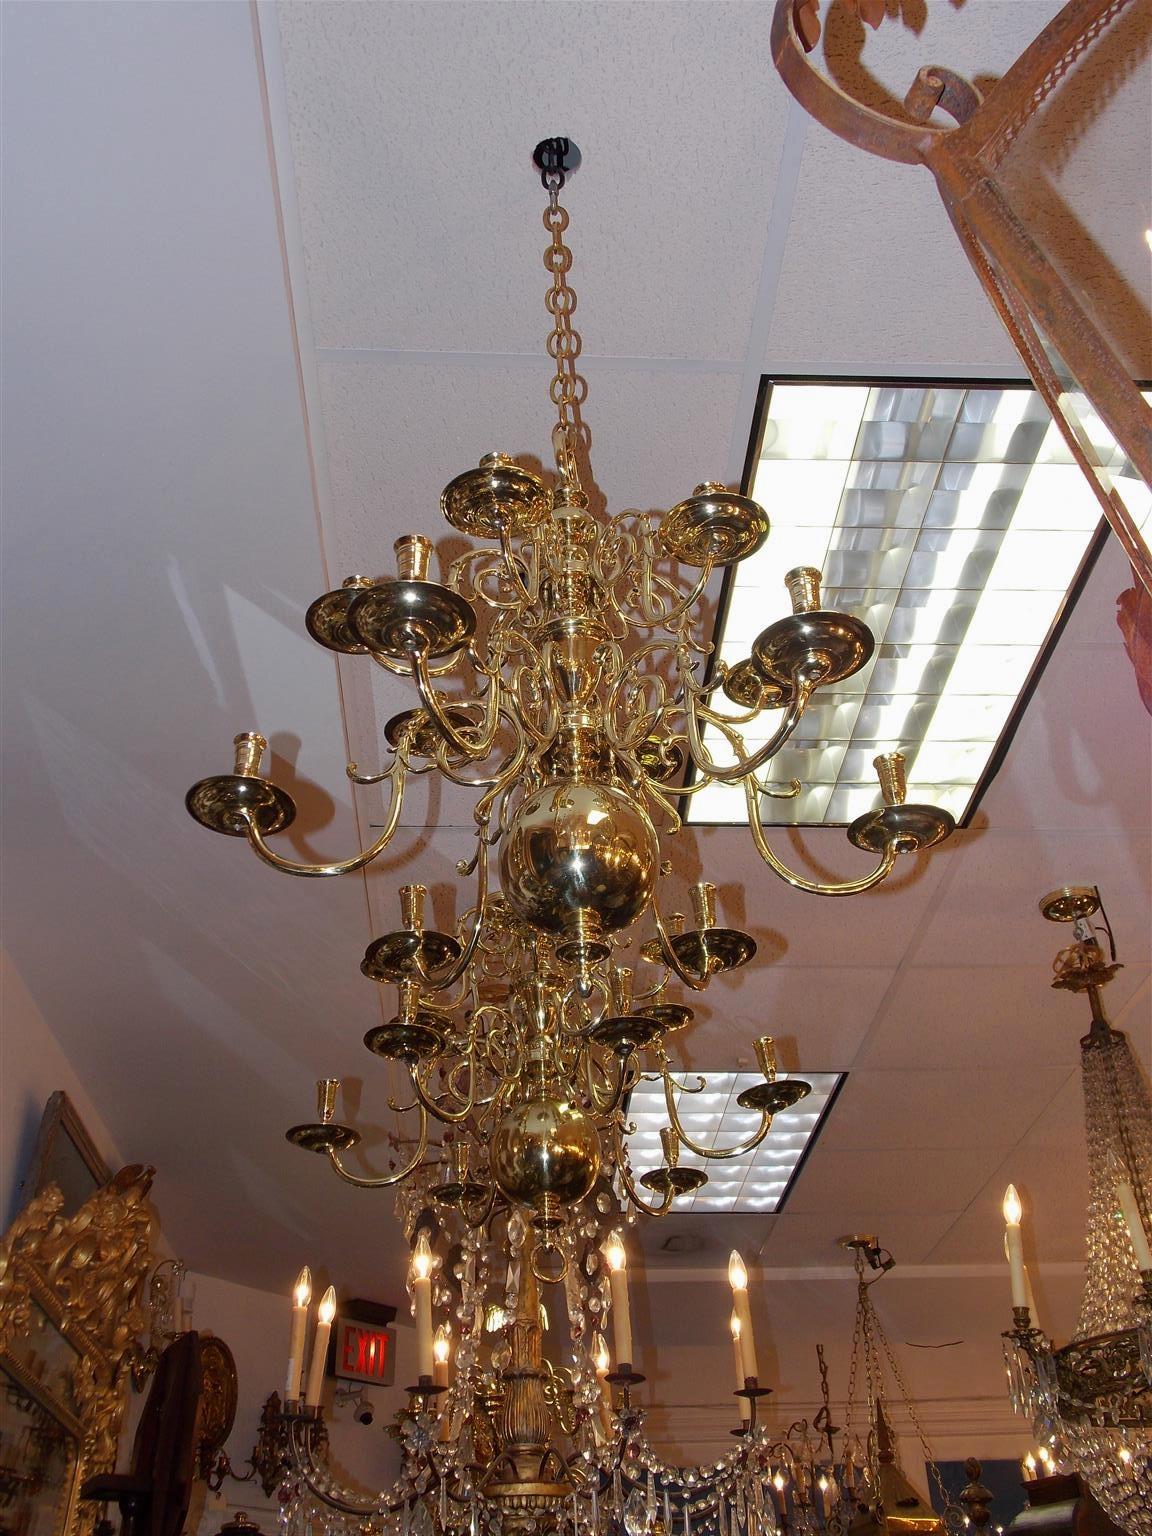 Pair of Dutch colonial brass two-tiered twelve light chandeliers with scrolled decorative arms, original bobeches, centered bulbous column, and terminating on a large ball with centered ring finial. Chandeliers are candle powered and can be